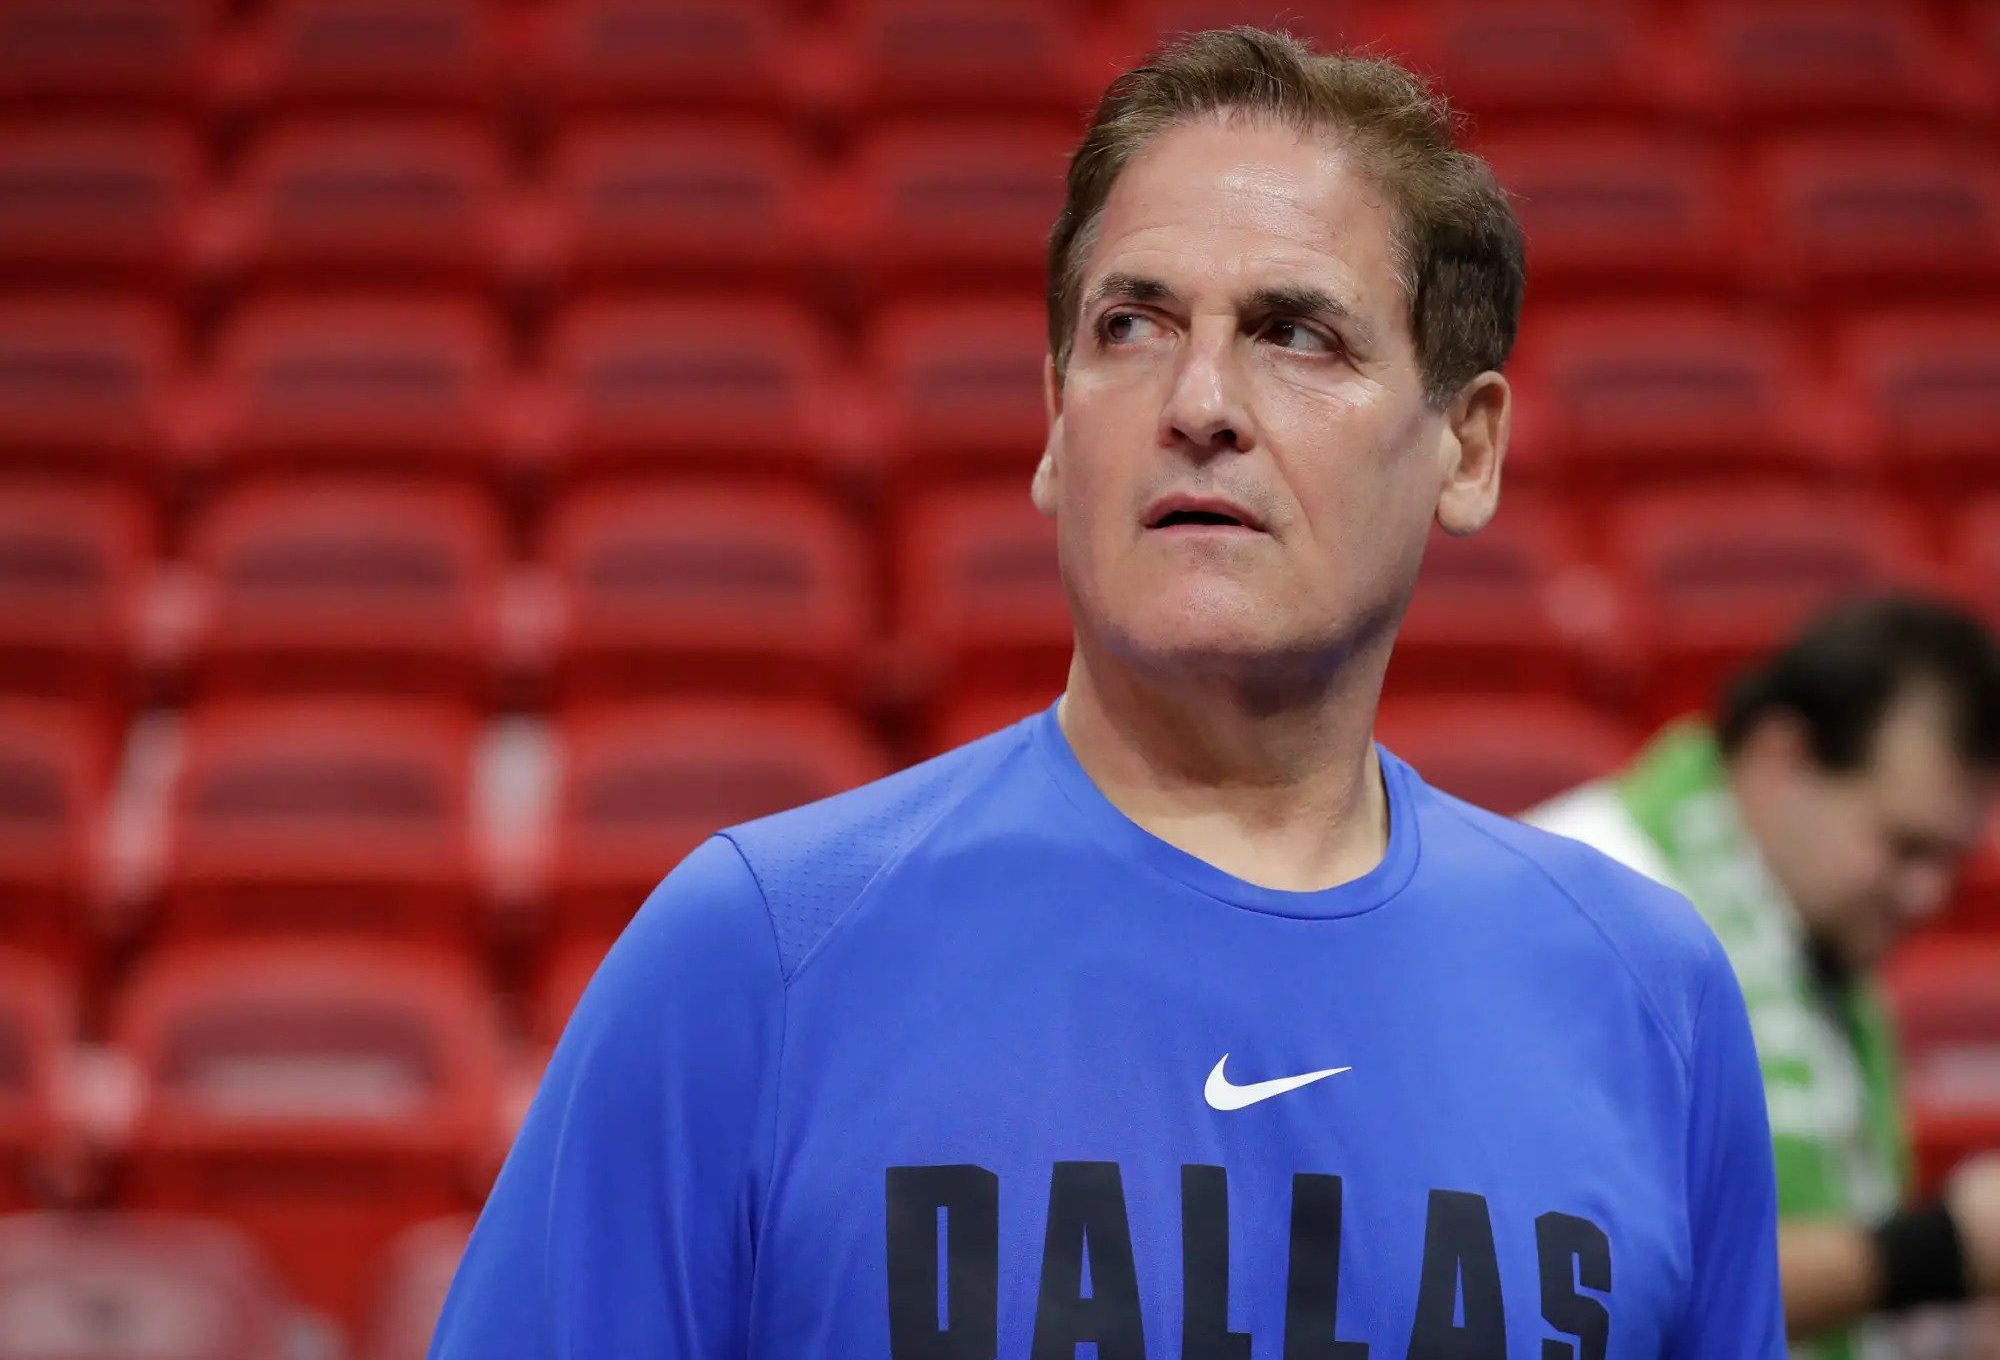 Mark Cuban Sued For Allegedly Promoting 'Ponzi Scheme’